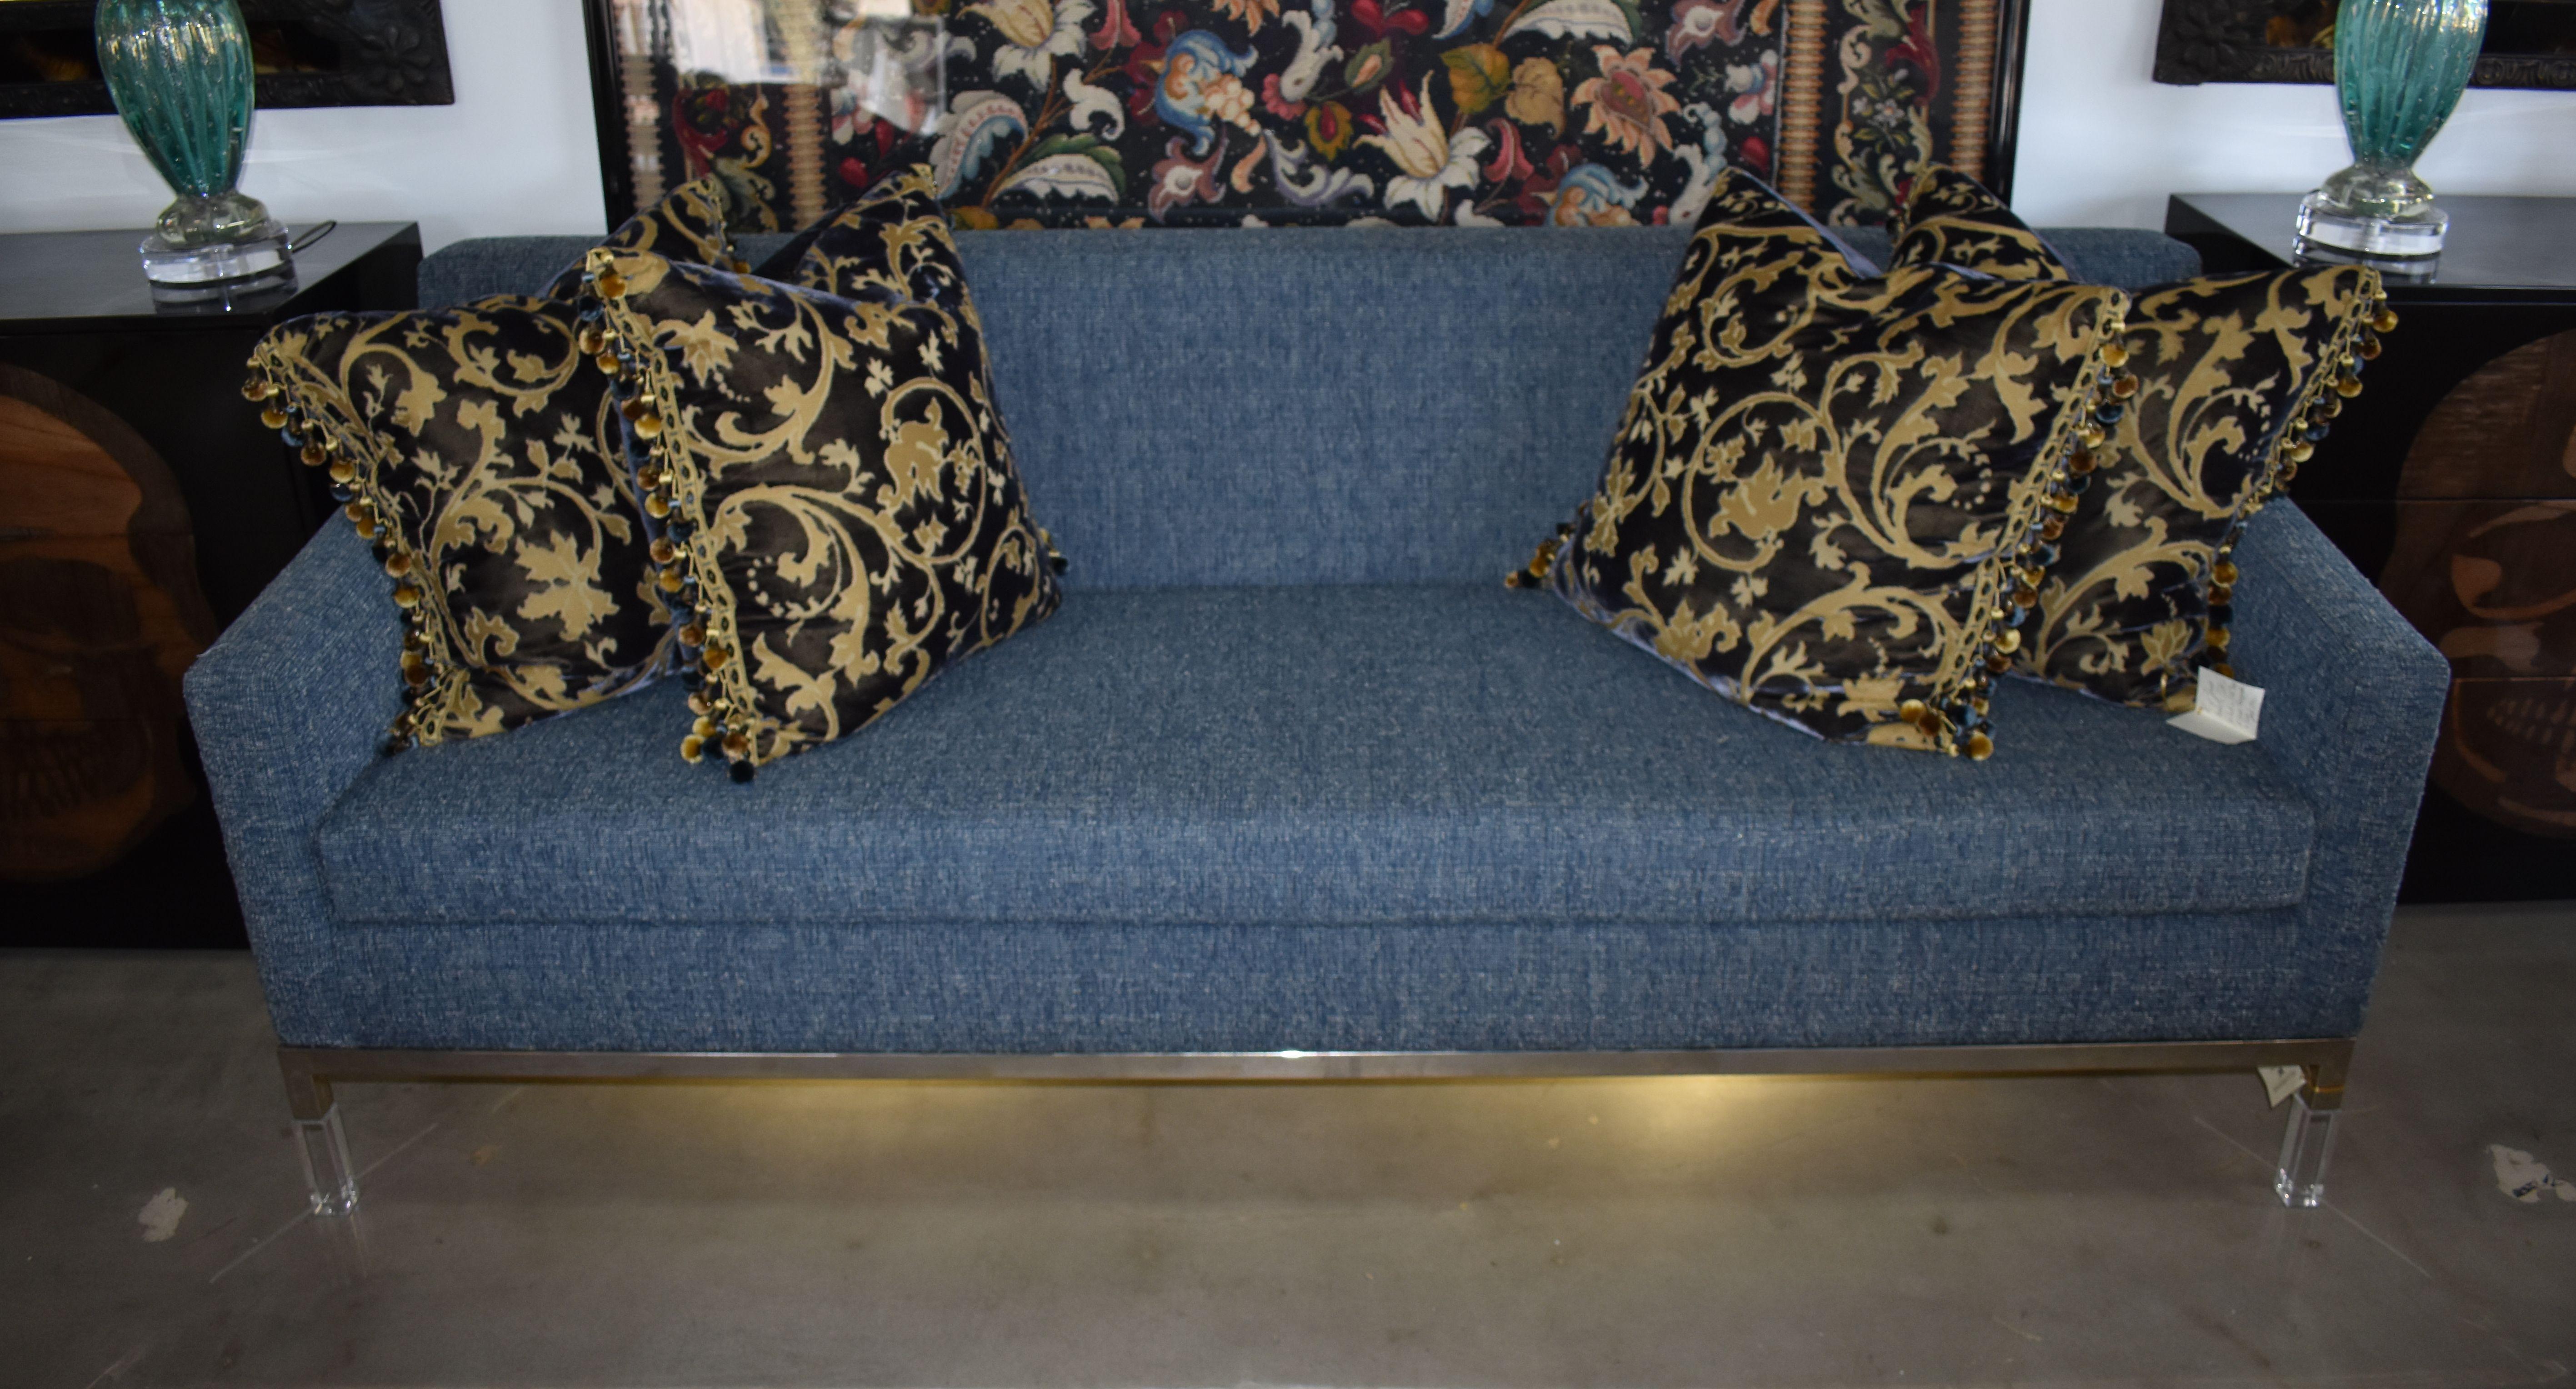 chrome hearts couch